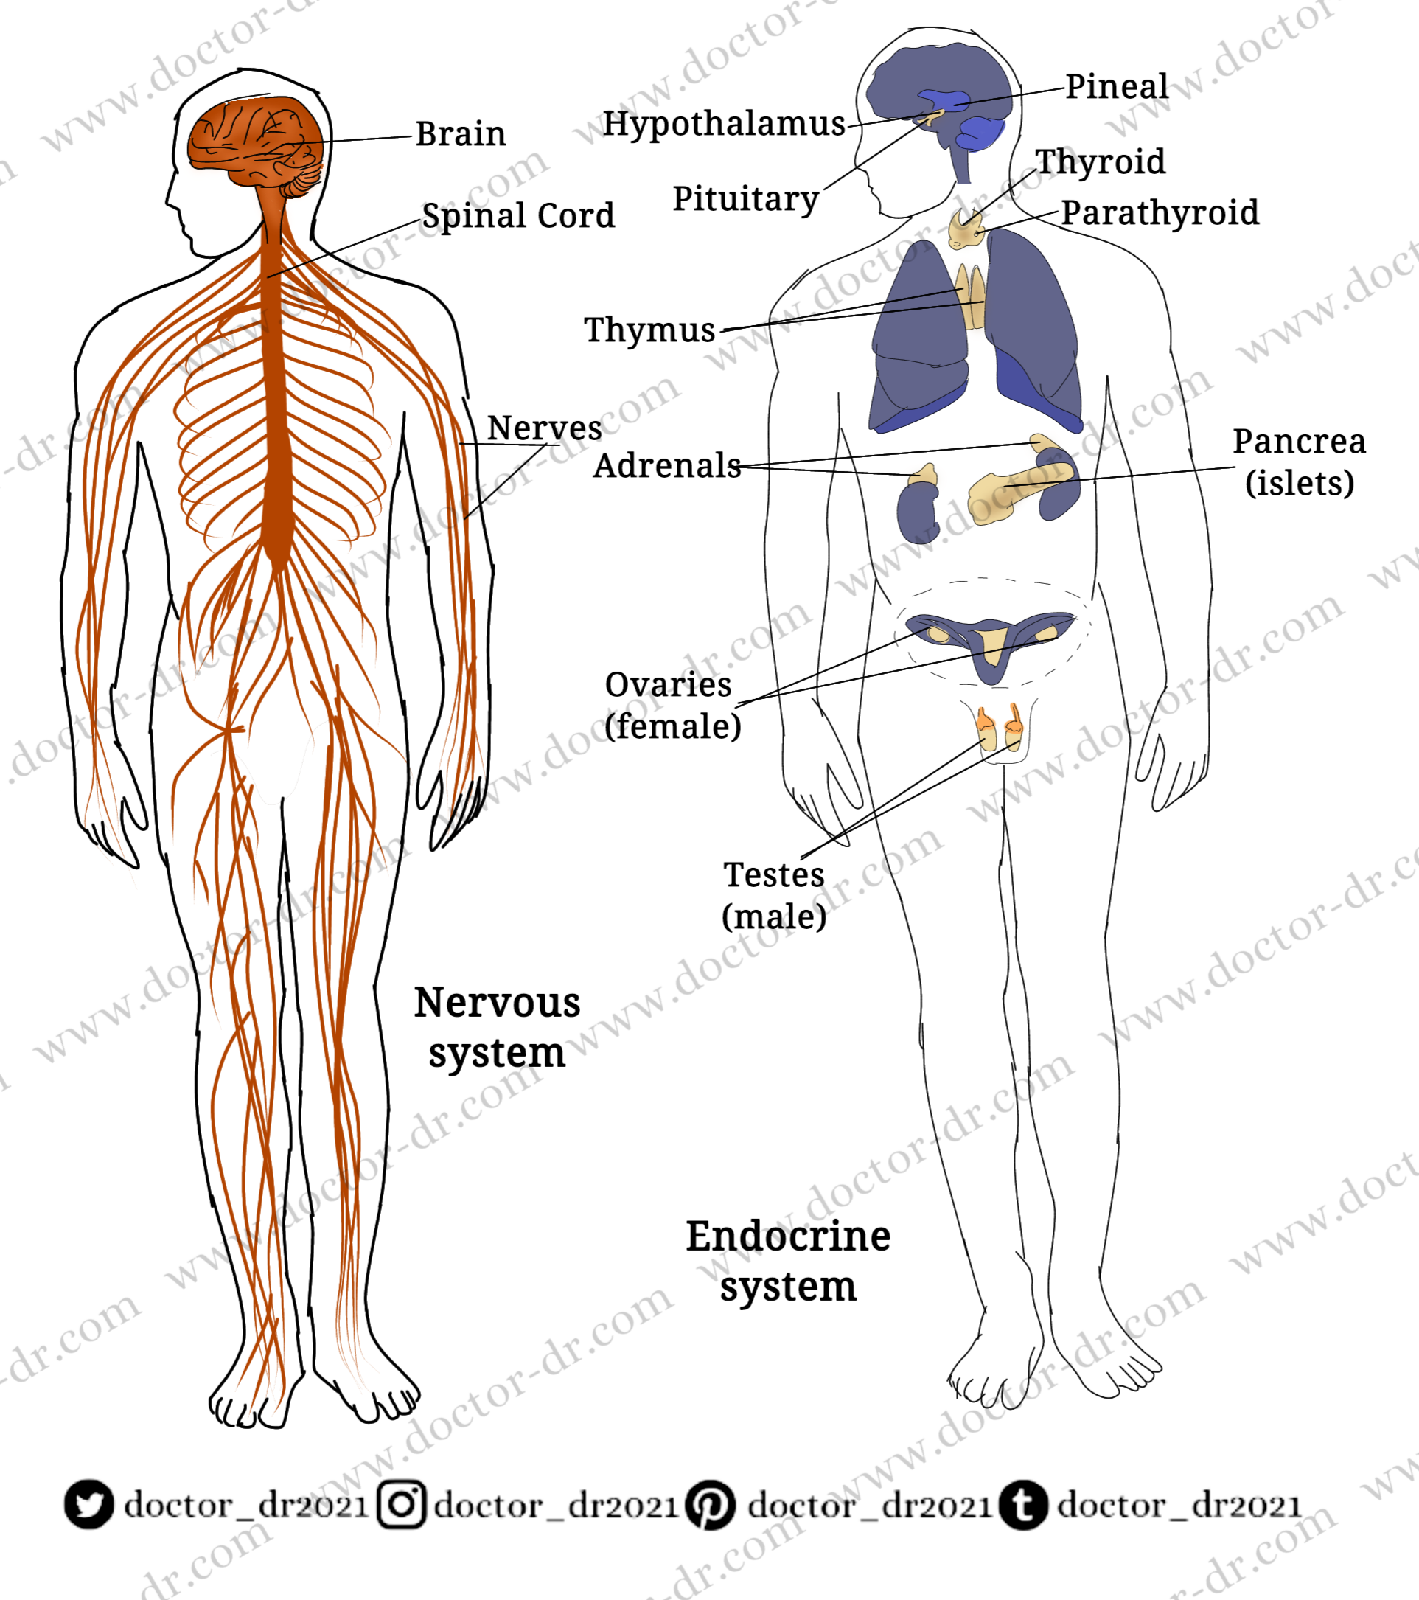 Levels of Organization - Anatomy and Physiology by Doctor-dr